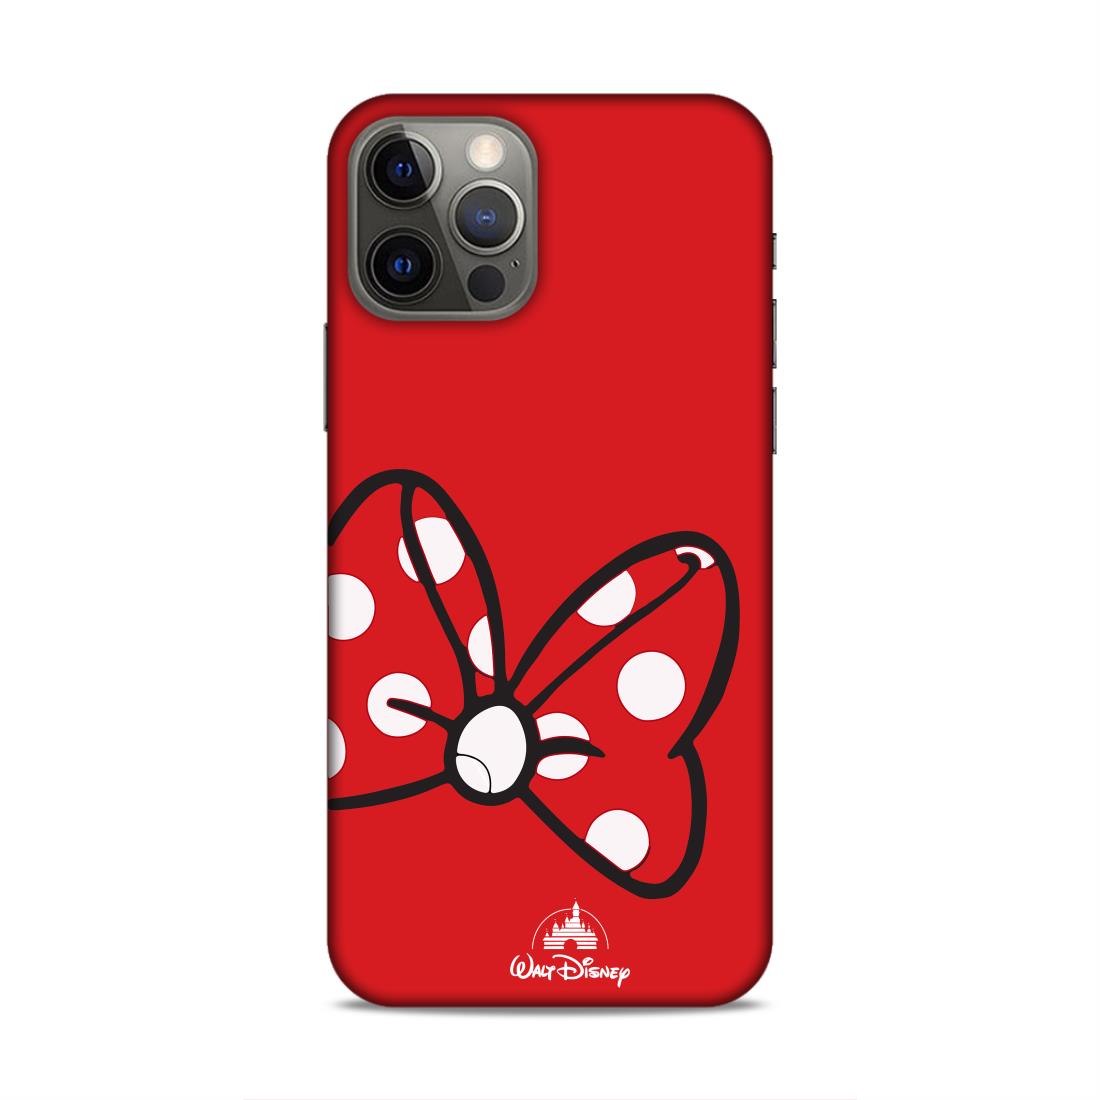 Minnie Polka Dots Hard Back Case For Apple iPhone 12 / 12 Pro